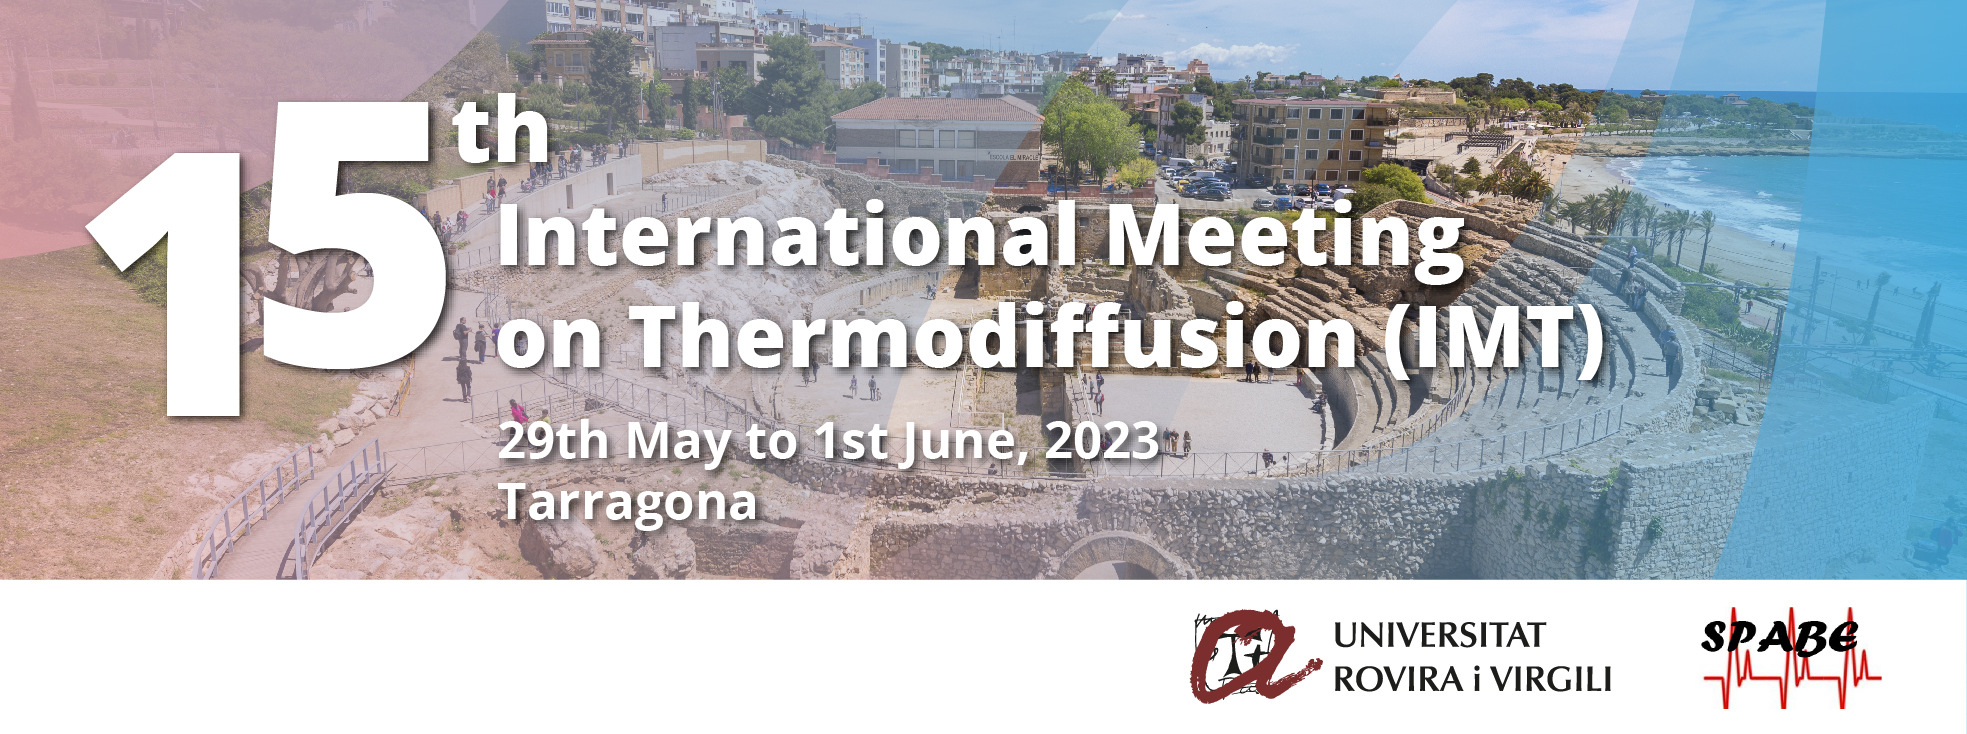 15th International Meeting on Thermodiffusion (IMT)